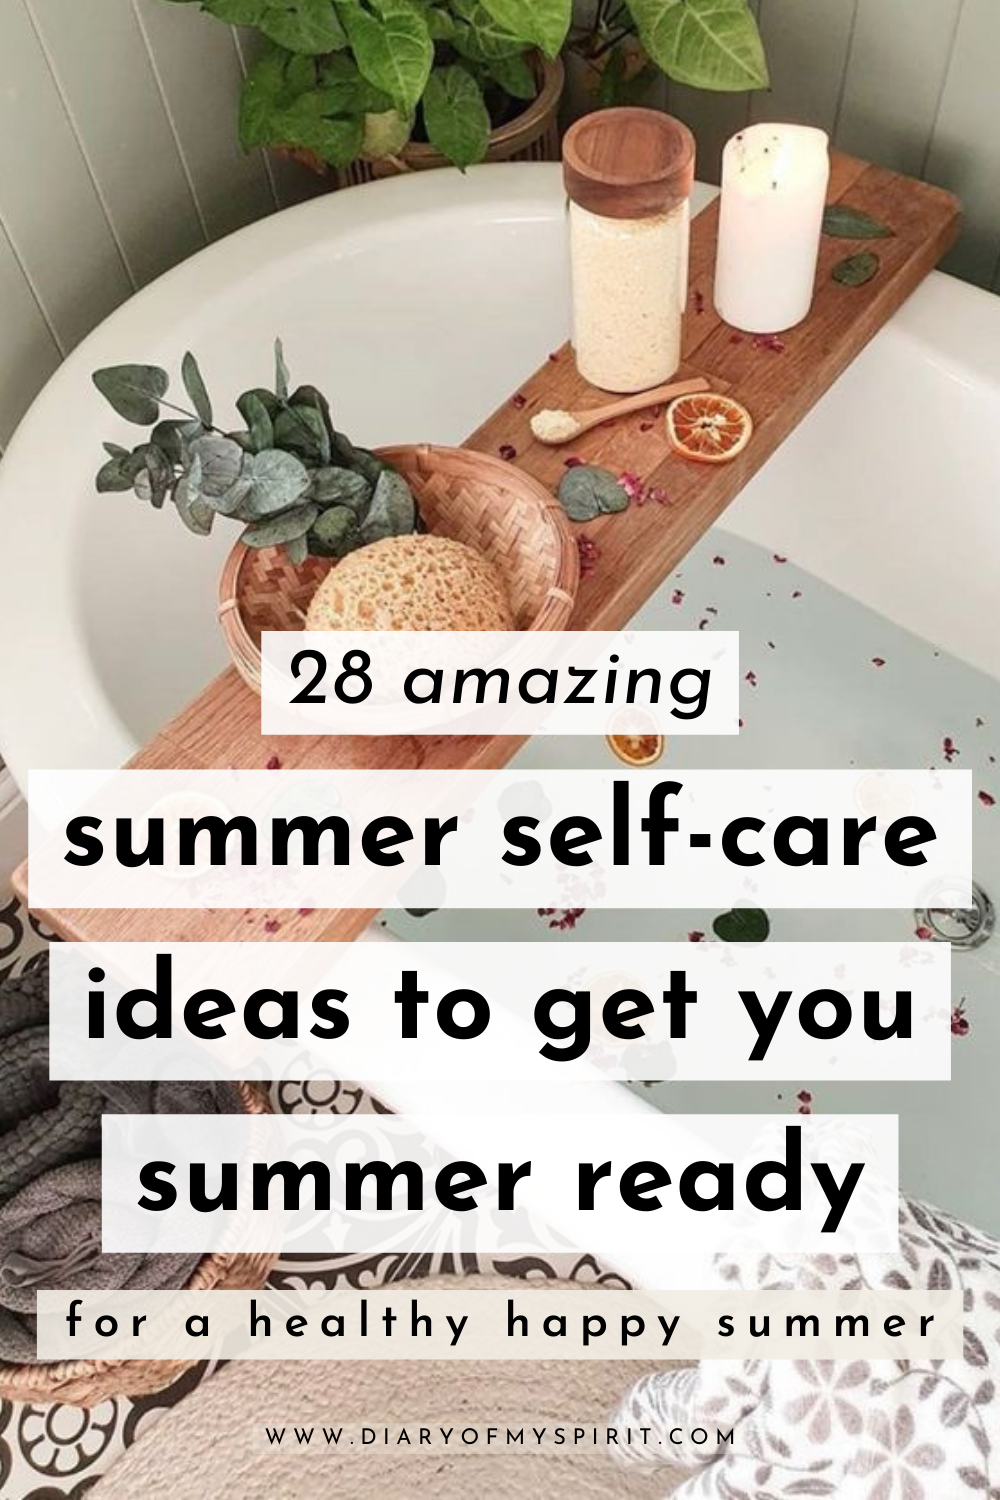 selfcare ideas for the summer. Summer self-care ideas, health and wellness tips for the summer